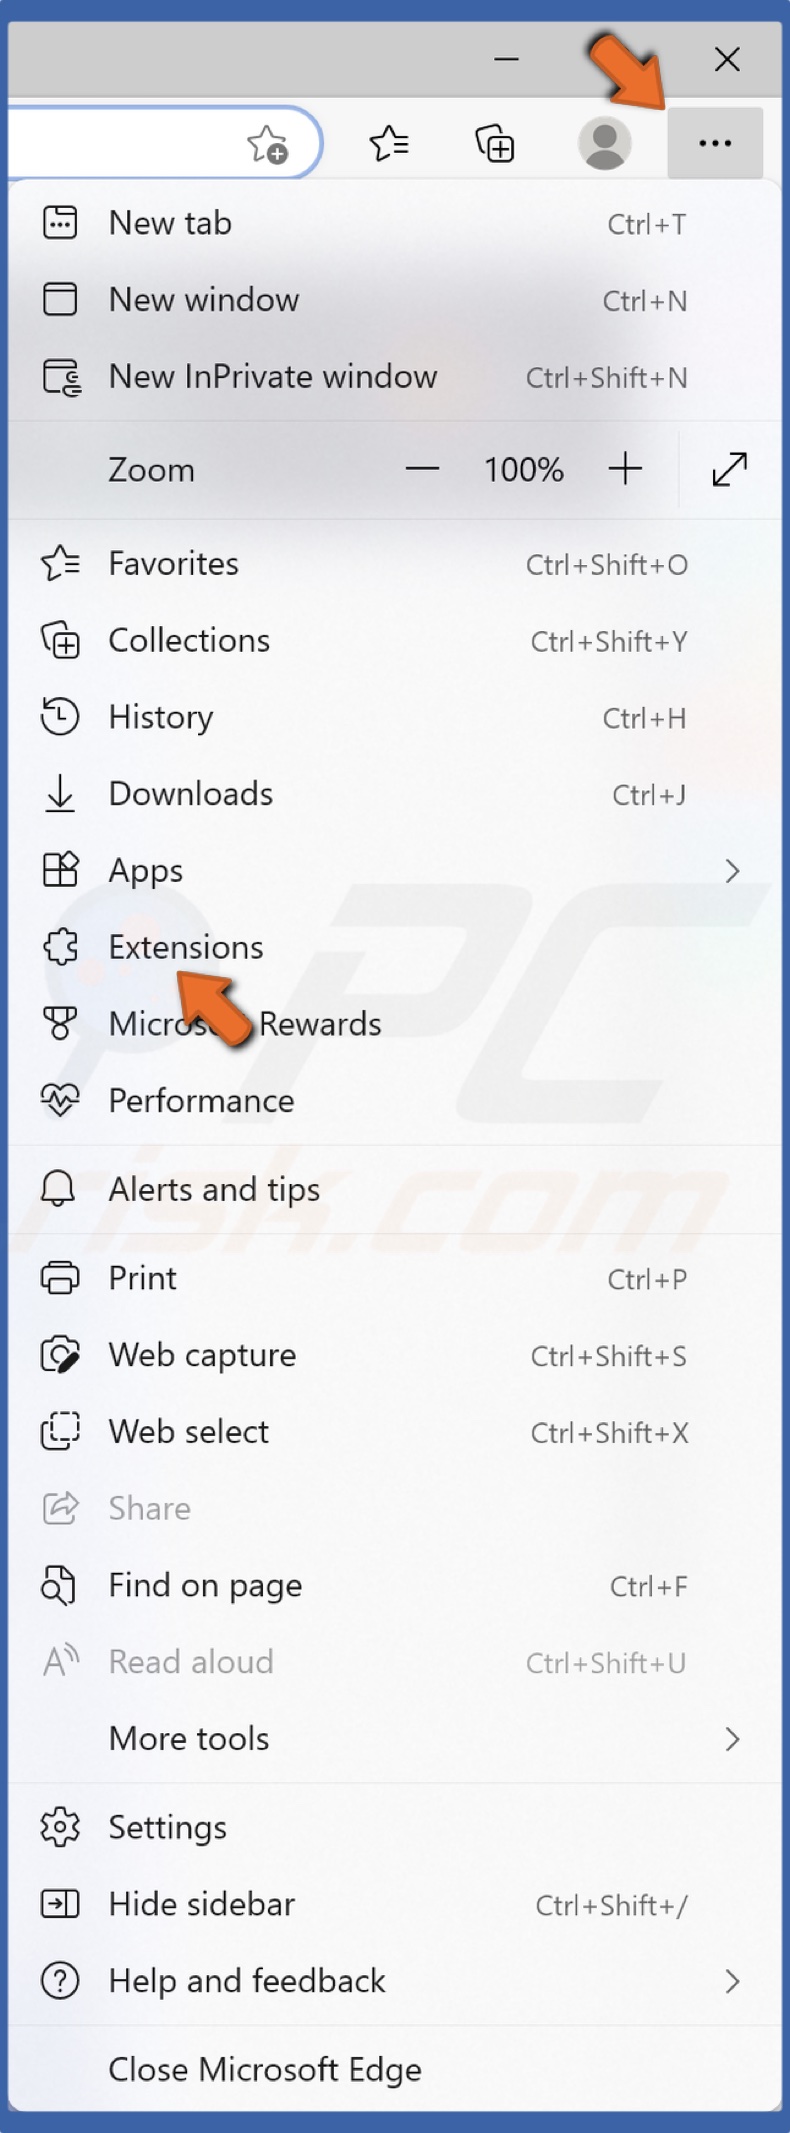 Open the Settings and more menu and click Extensions